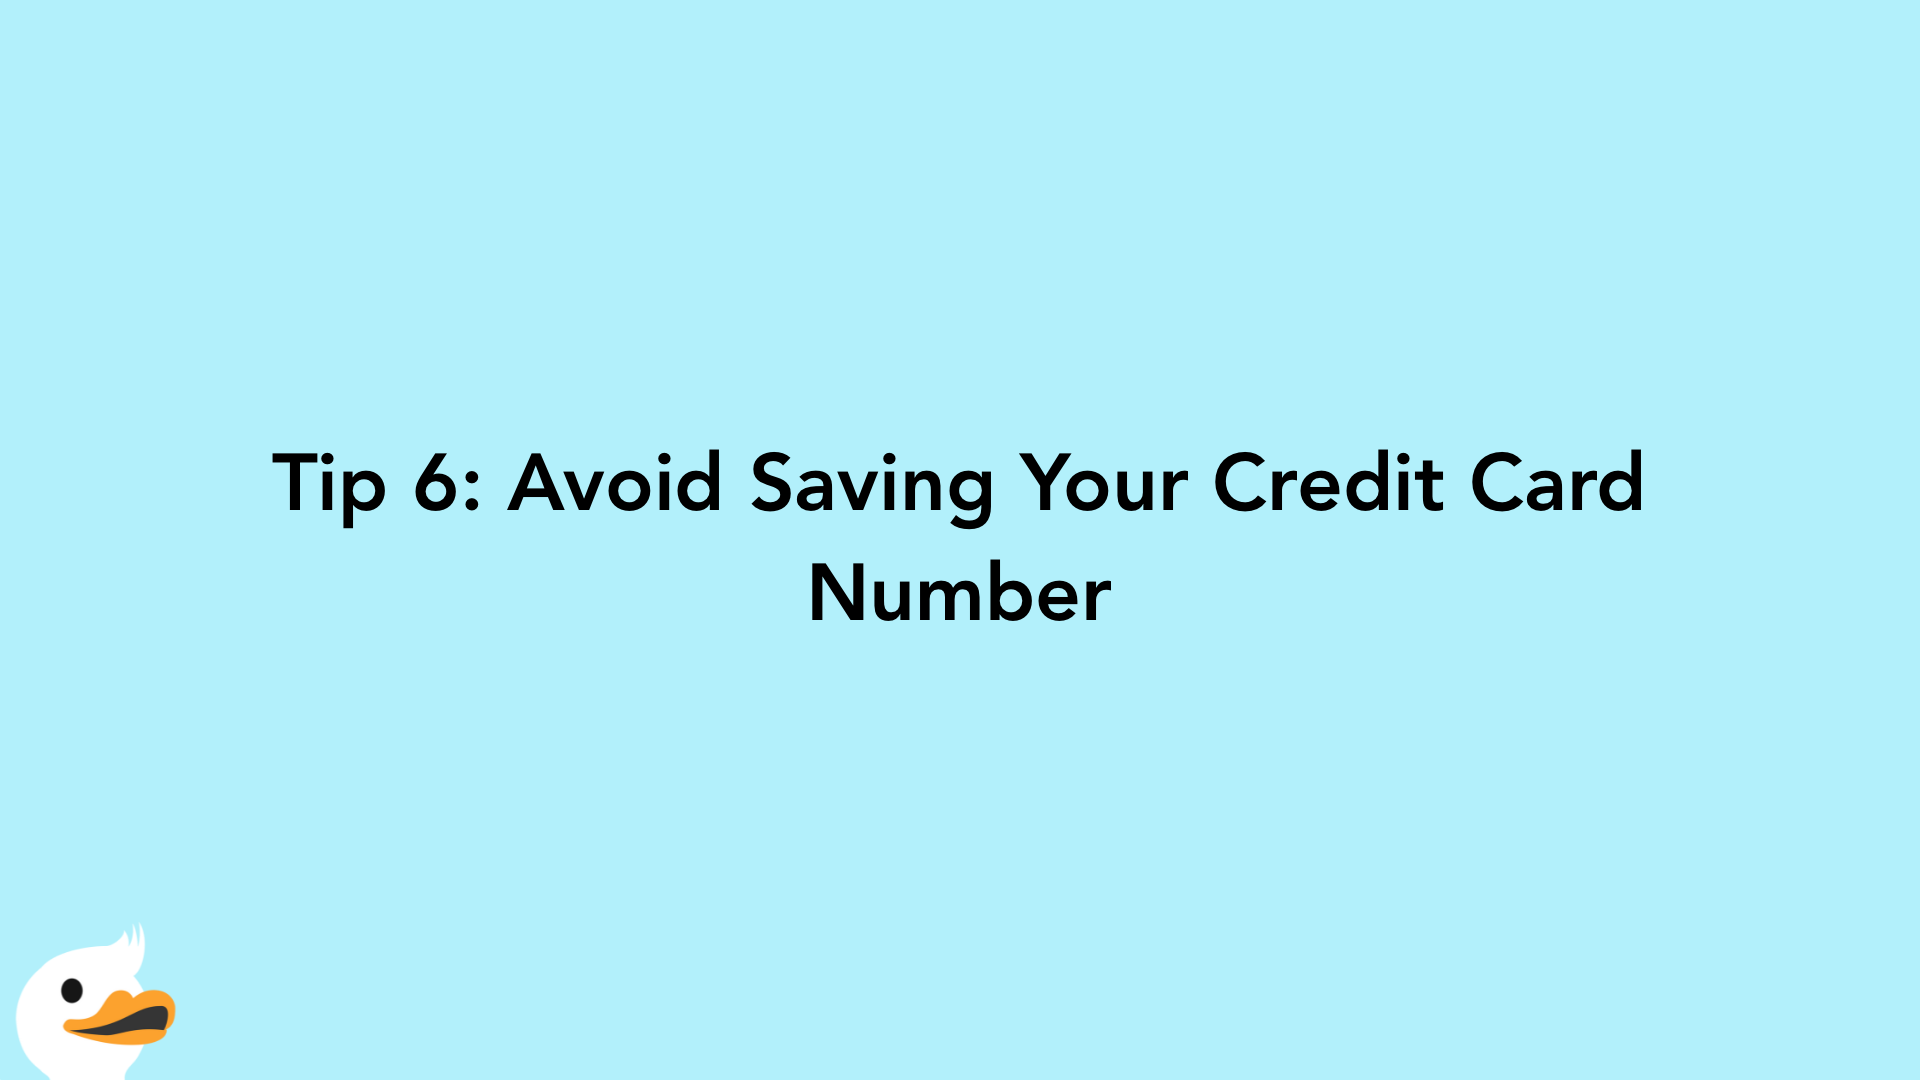 Tip 6: Avoid Saving Your Credit Card Number